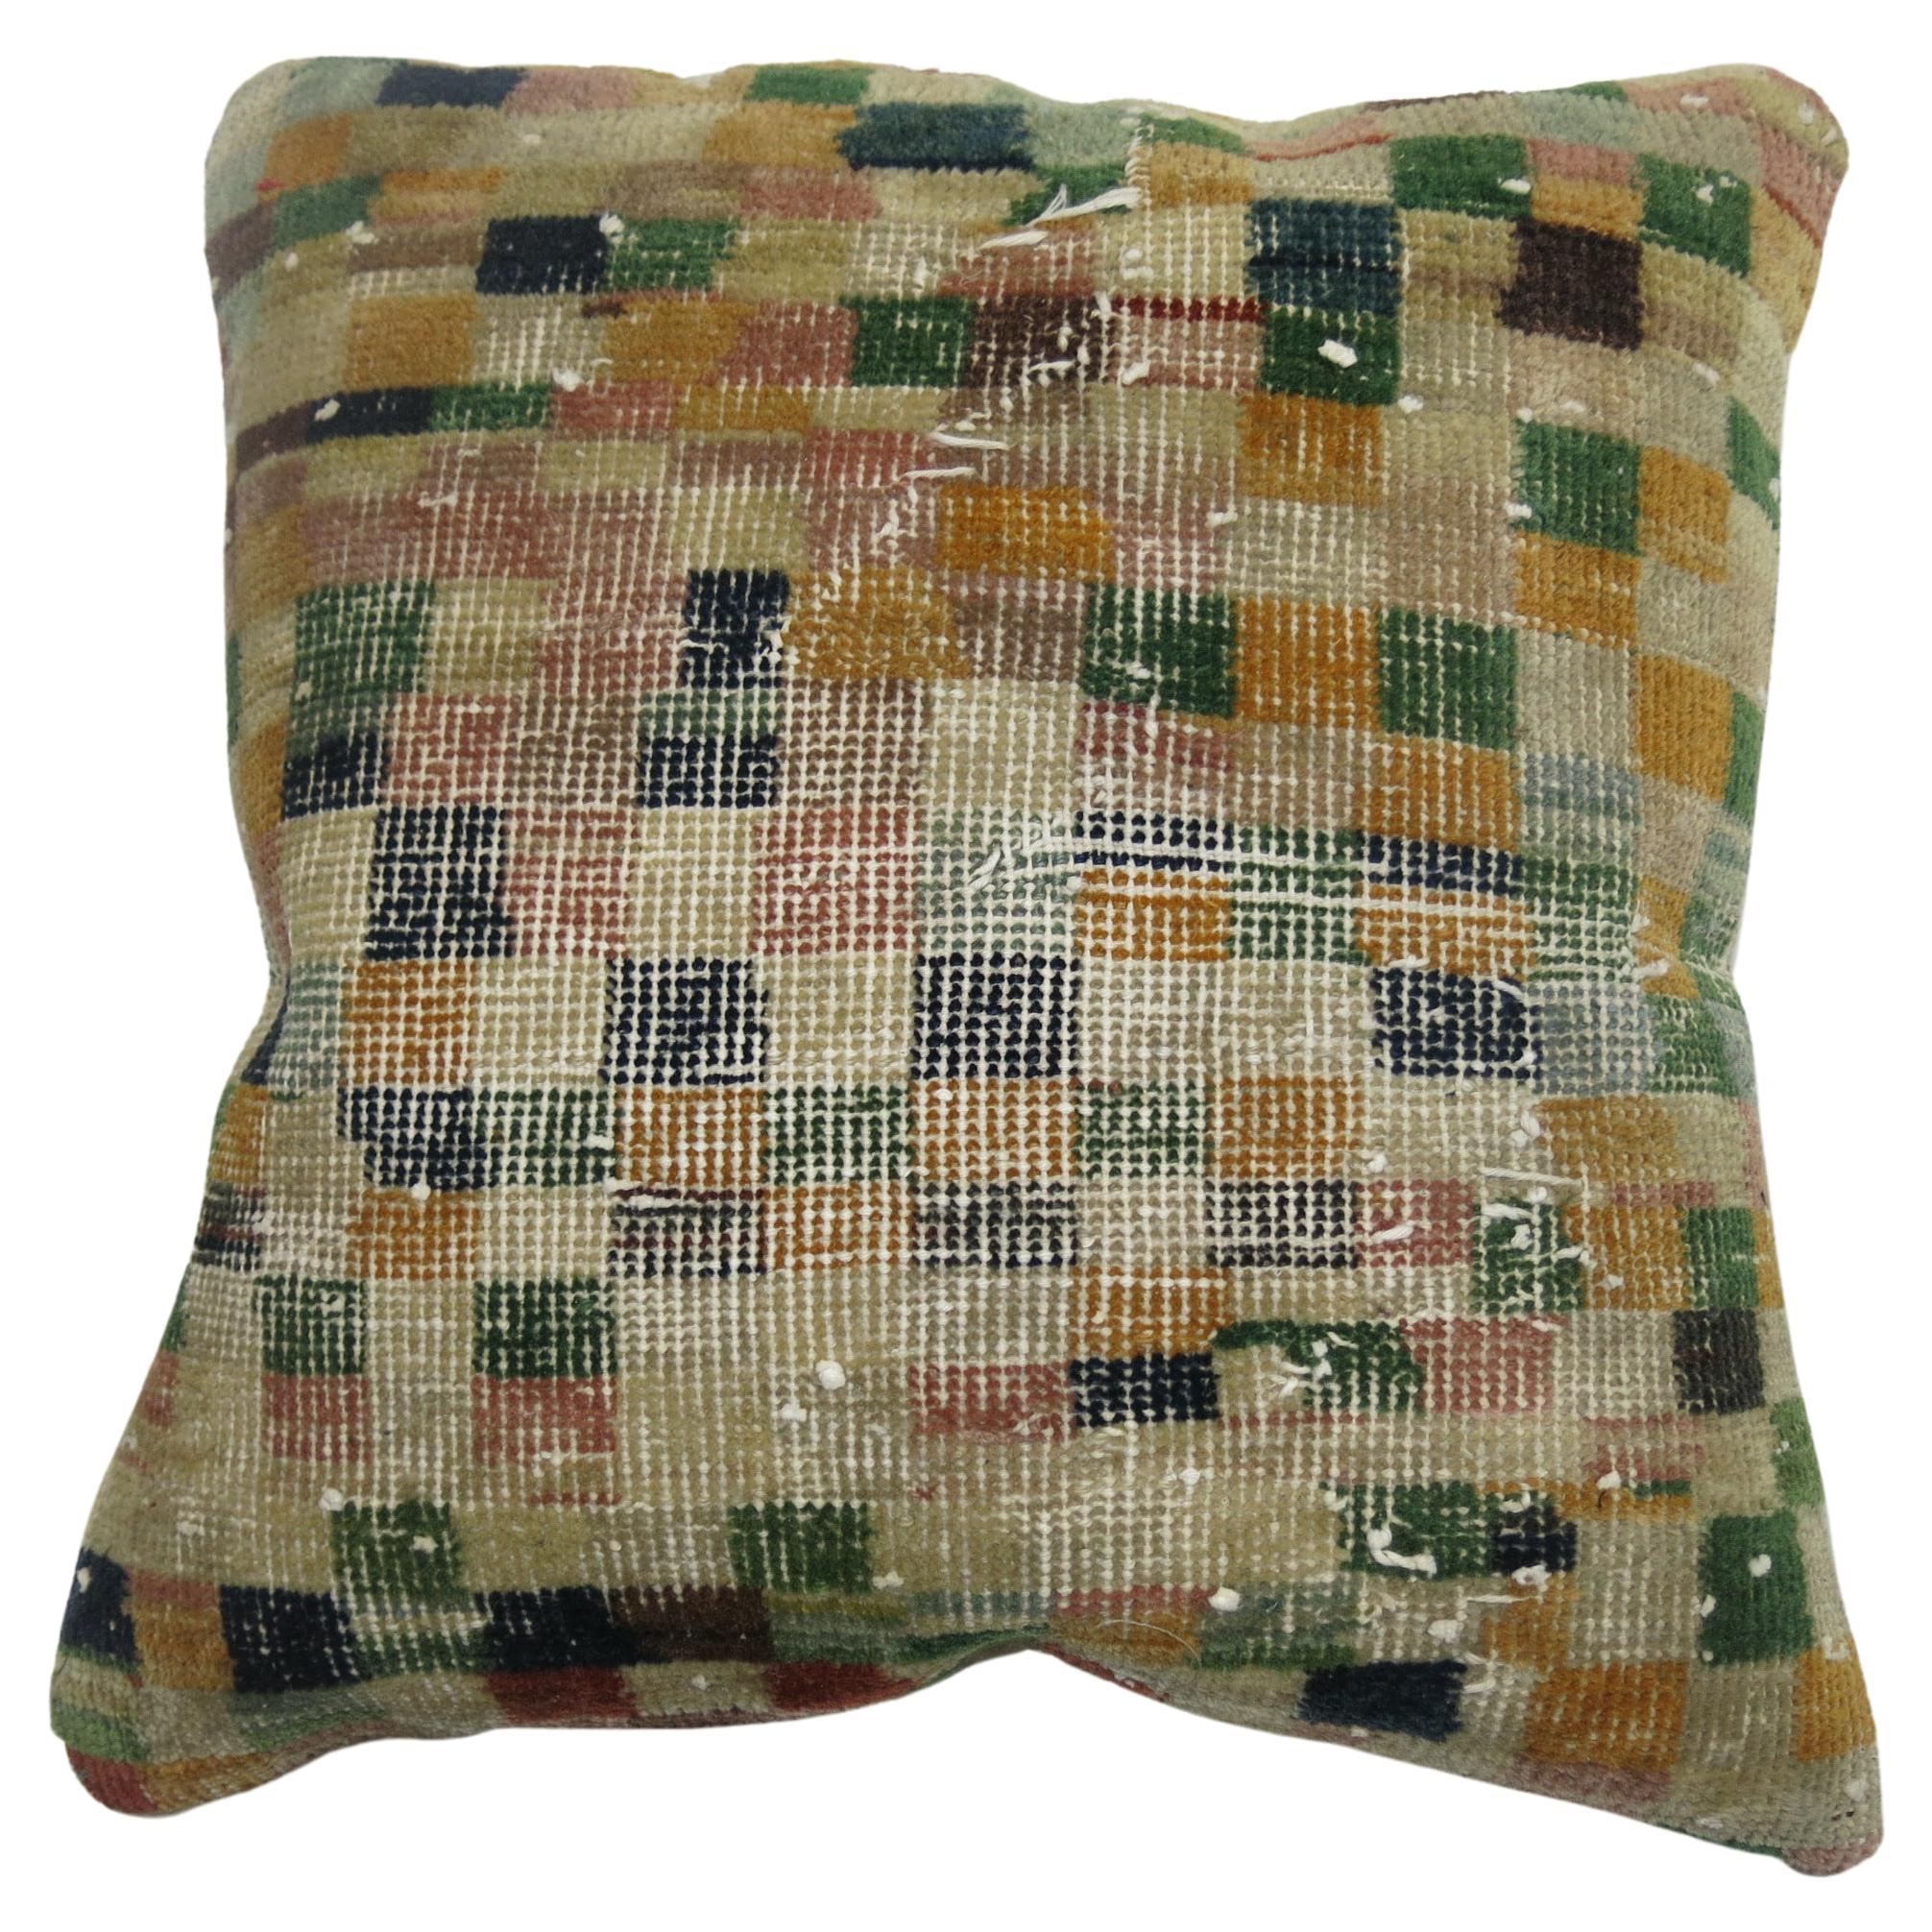 Pillow made from a Turkish Deco rug with a checkerboard motif

Measures: 19'' x 20''.